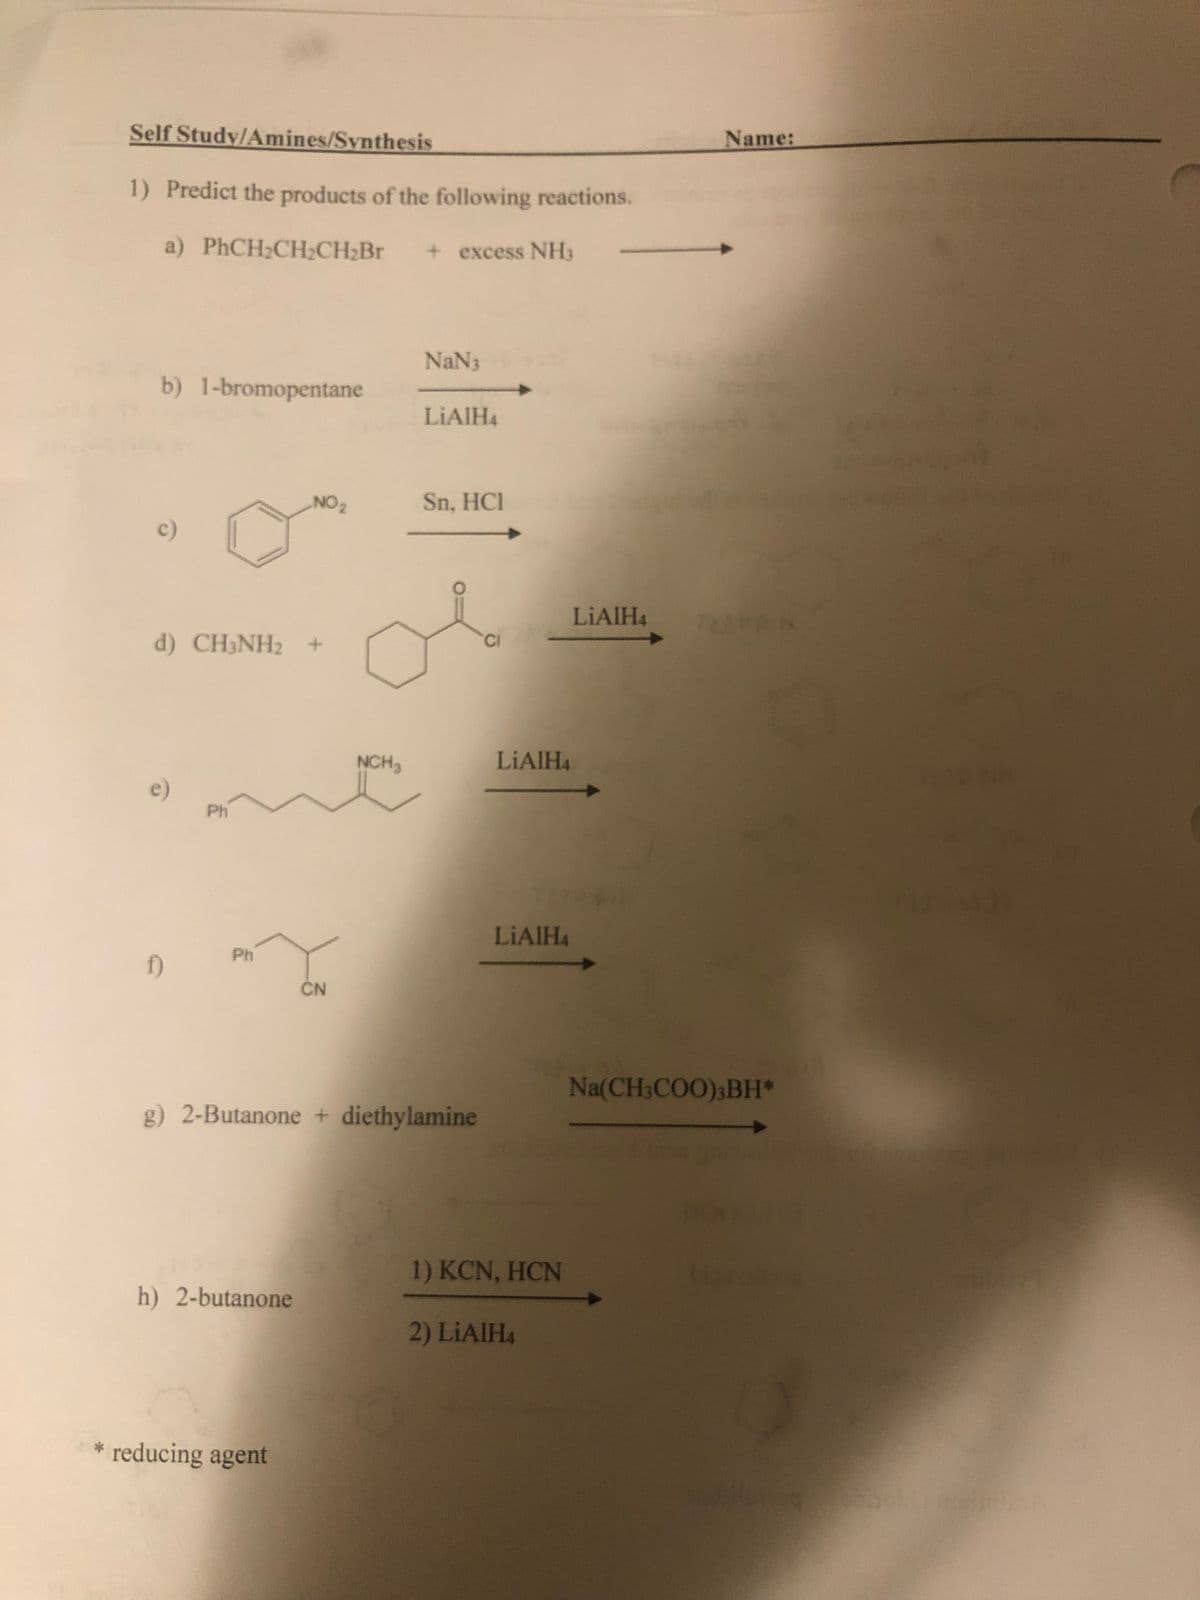 Self Study/Anmines/Synthesis
Name:
1) Predict the products of the following reactions.
a) PHCH2CH2CH2BR
+excess NH3
NaN3
b) 1-bromopentane
LIAIH4
NO 2
Sn, HCI
LIAIH4
d) CH3NH2 +
CI
NCH3
LIAIH4
Ph
LIAIH4
Ph
f)
CN
Na(CH3COO);BH*
g) 2-Butanone + diethylamine
1) KCN, HCN
h) 2-butanone
2) LIAIH4
reducing agent
